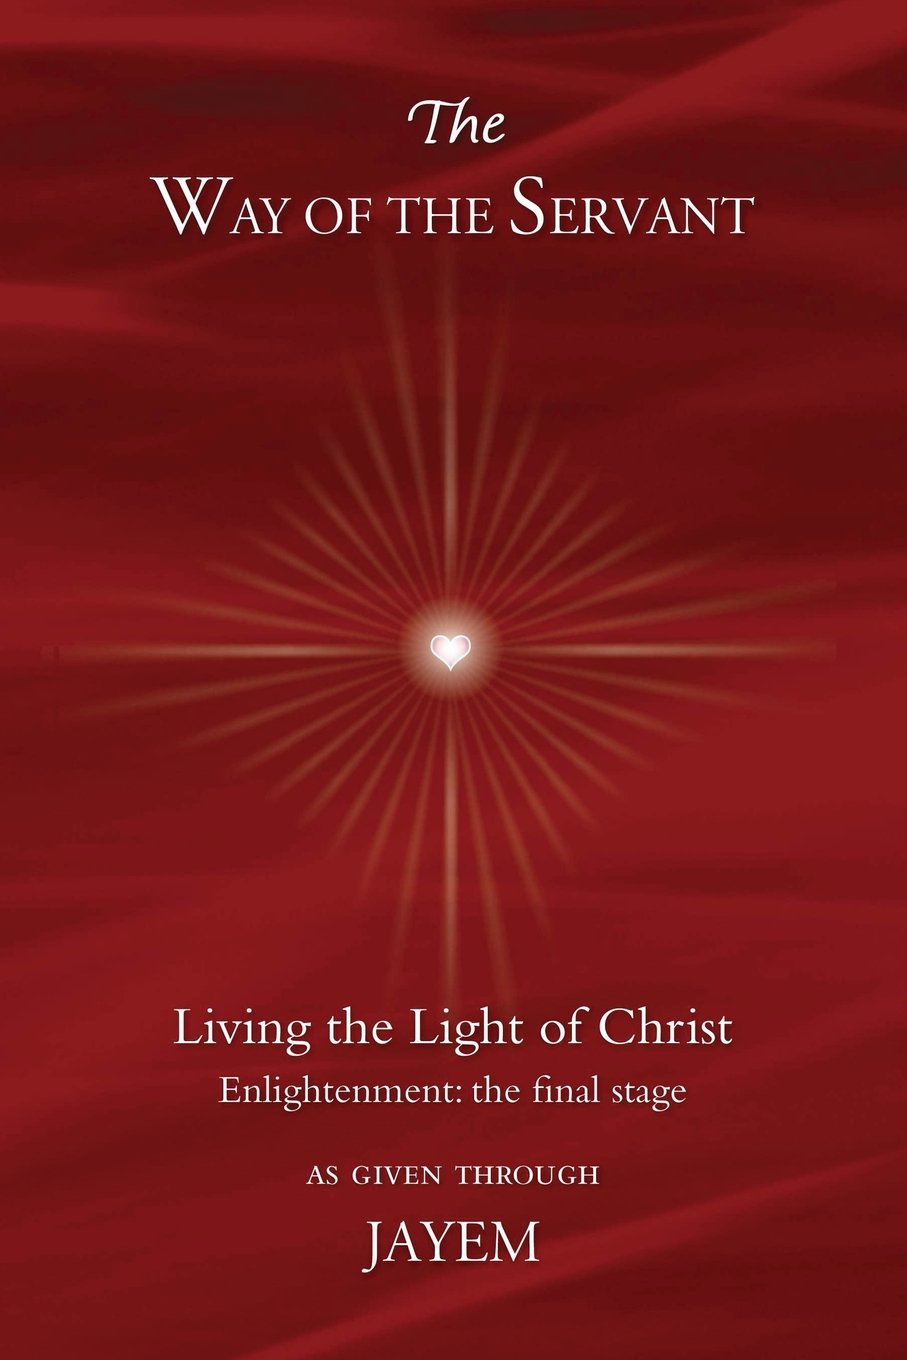 Livre ISBN 6029891189 The way of the servant : living the light of Christ. Enlightenment: the final stage (Jayem)